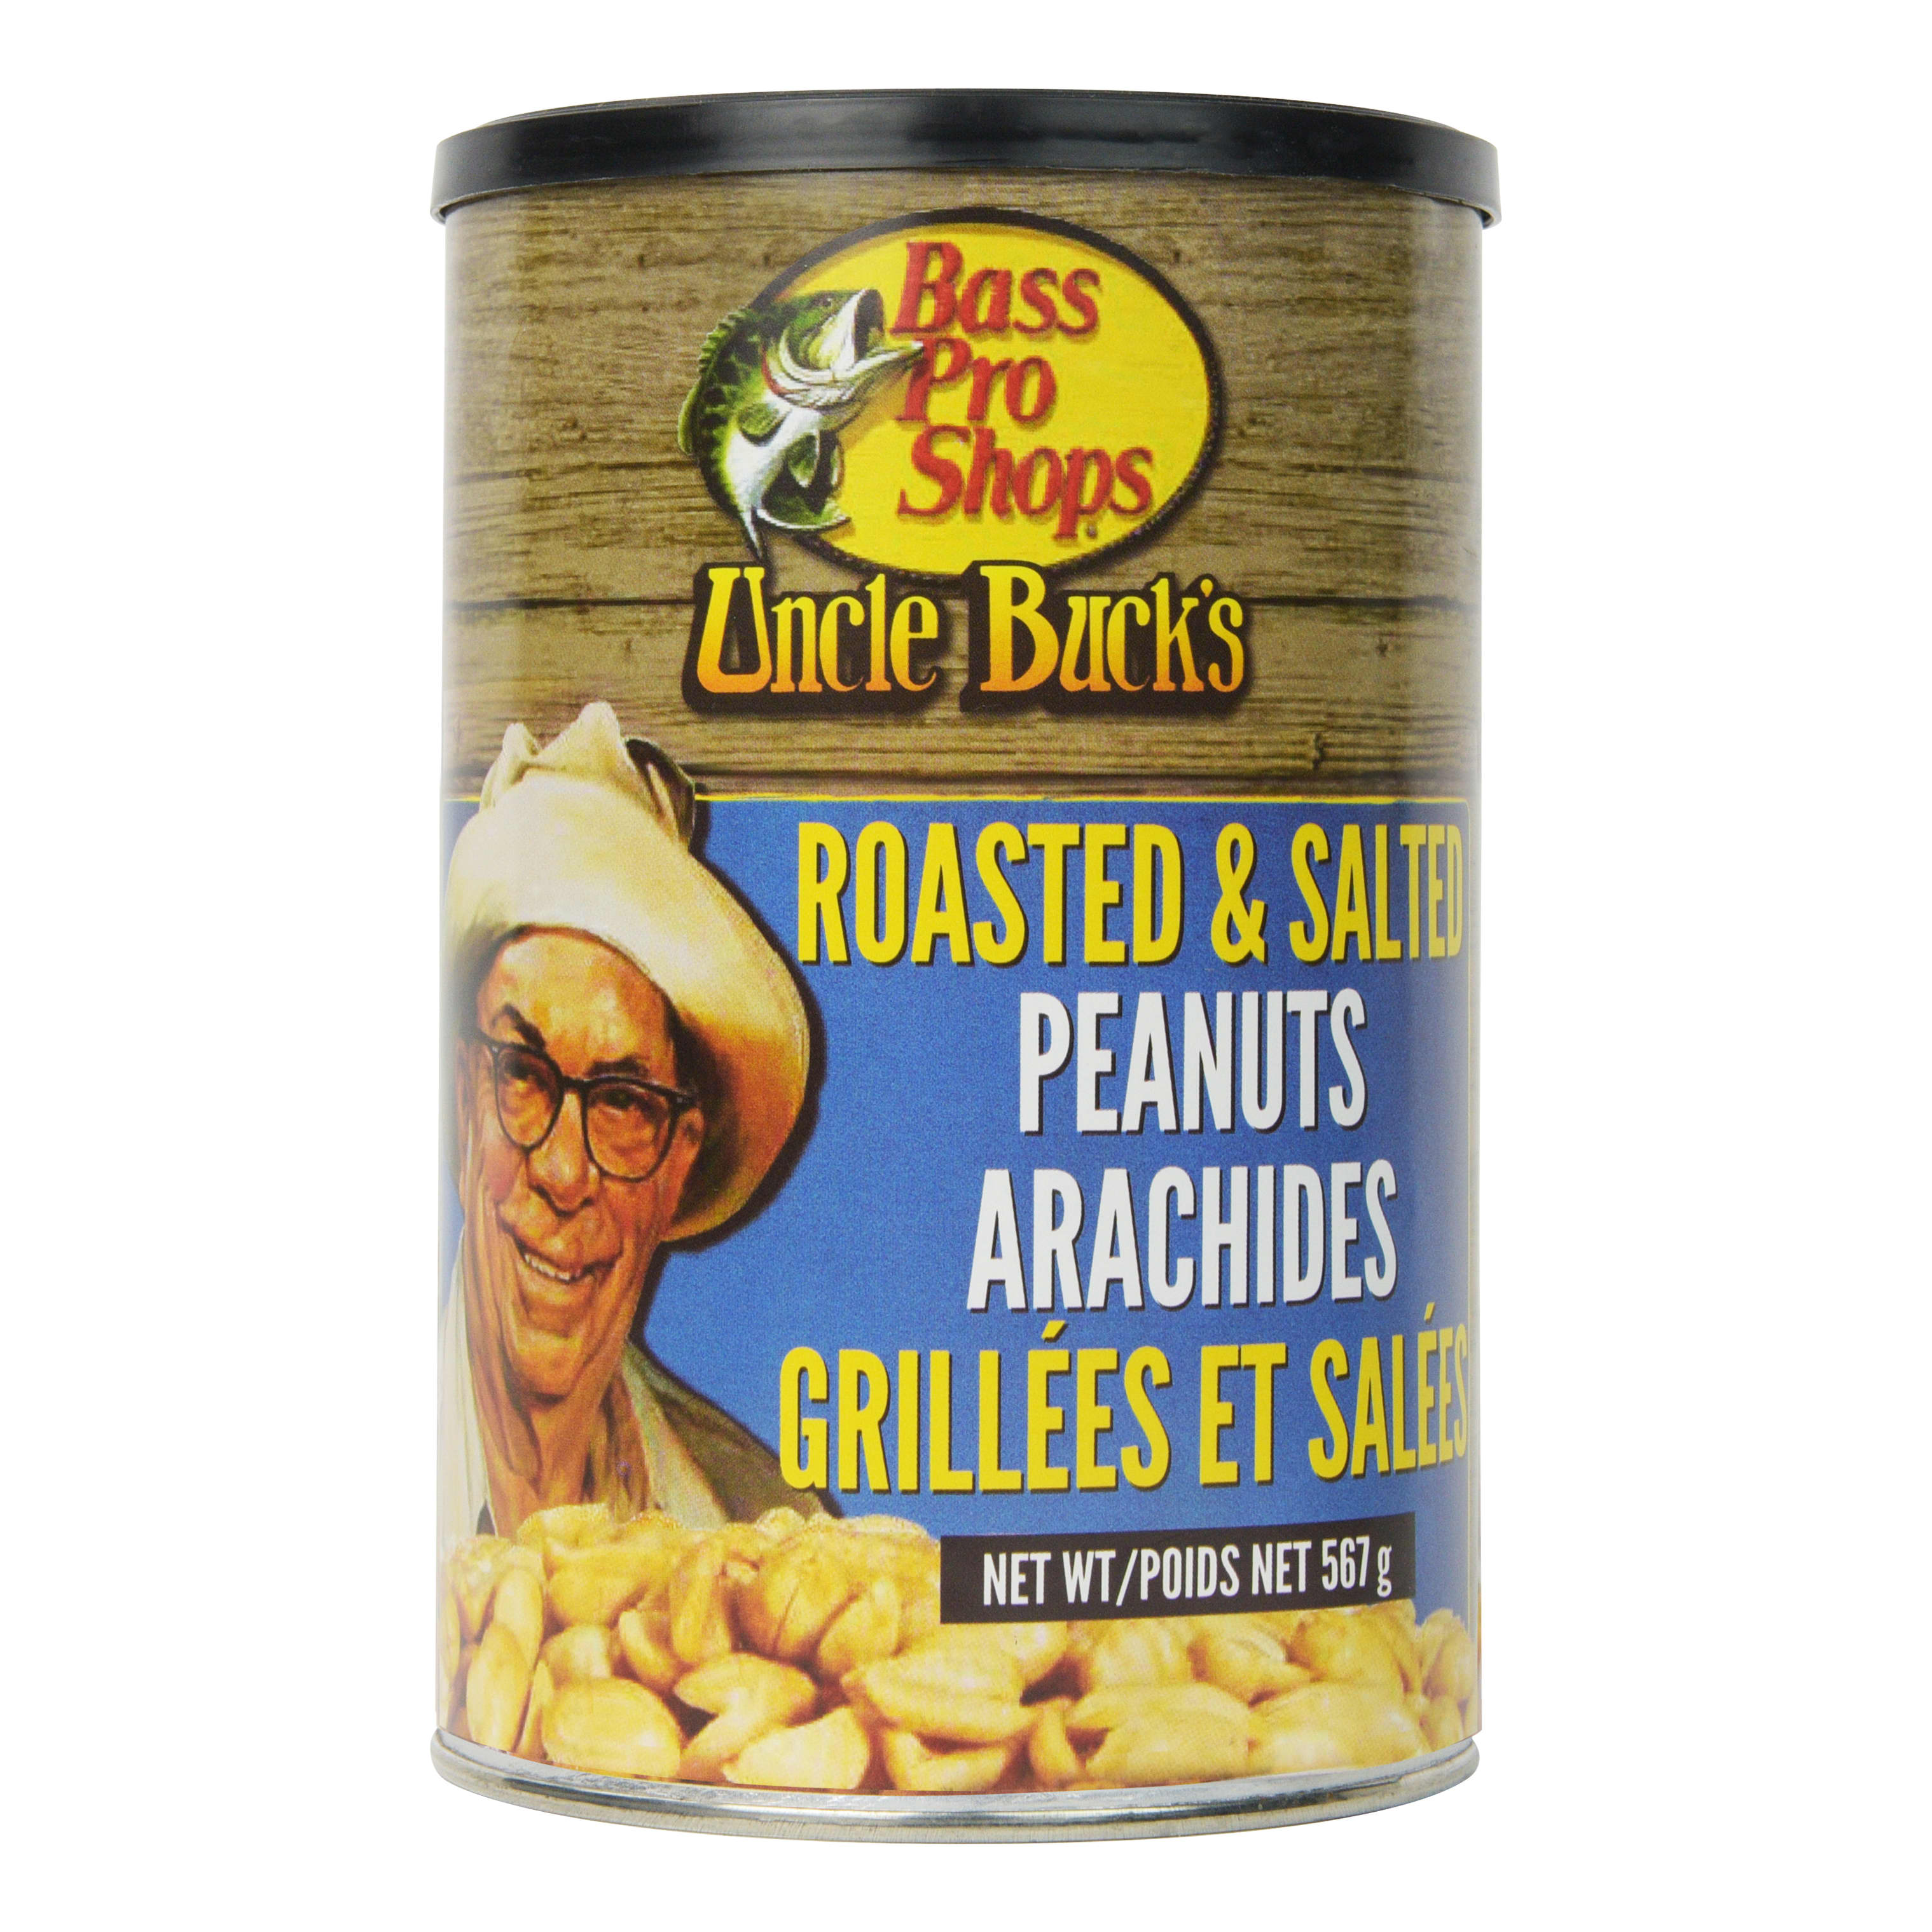 Bass Pro Shops® Uncle Buck's® Peanuts - Roaster & Salted